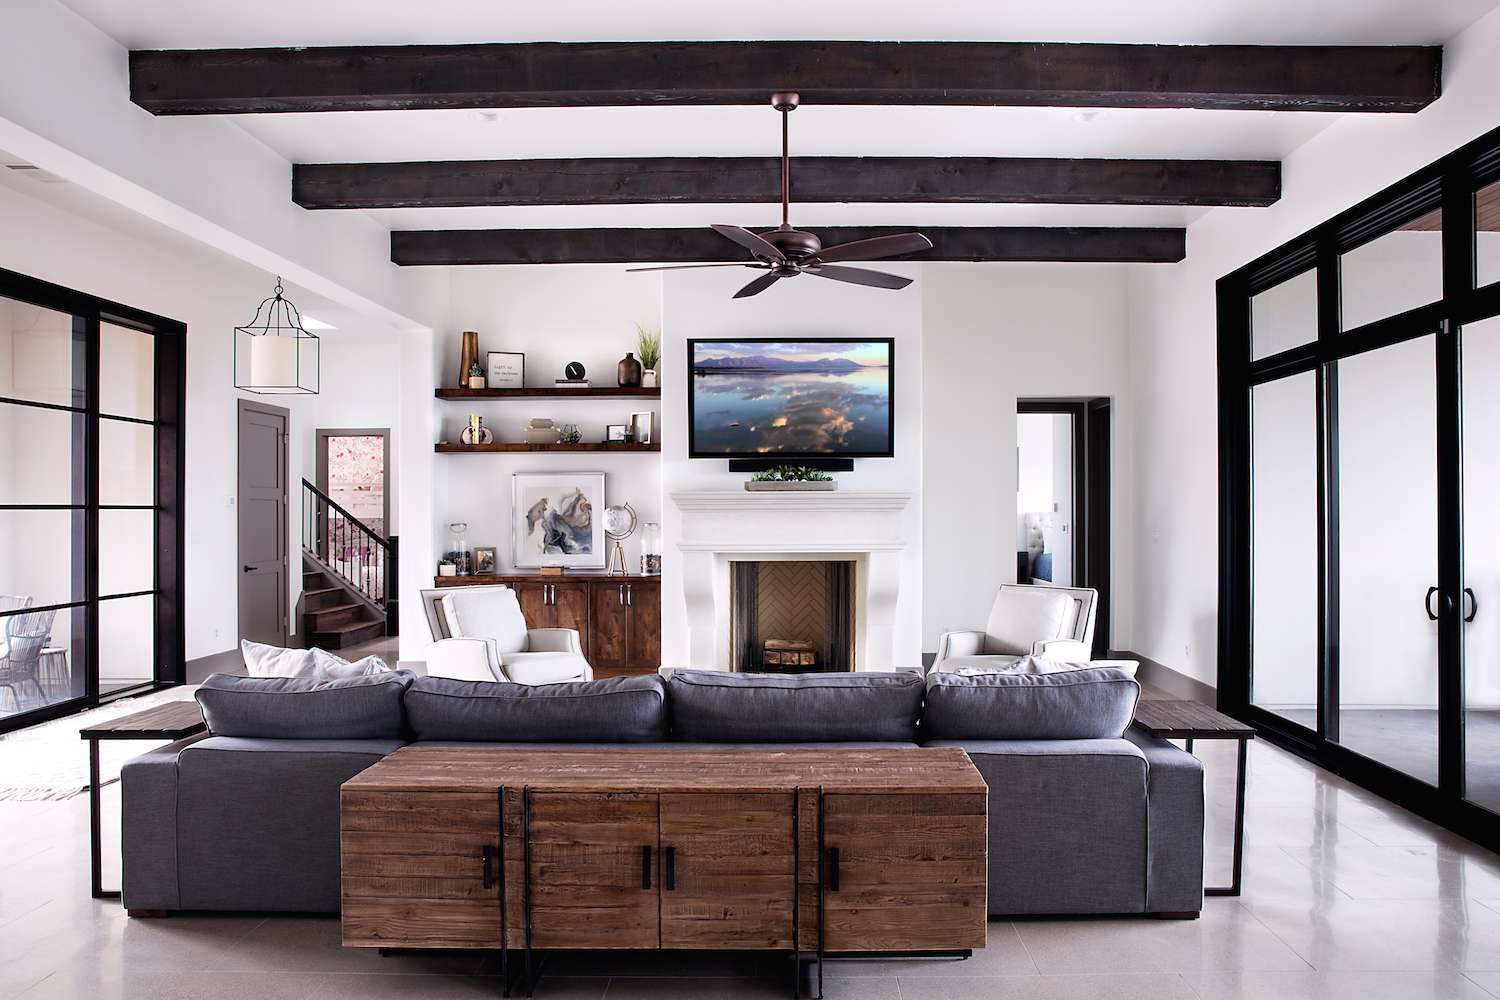 great room with exposed beams and rustic design